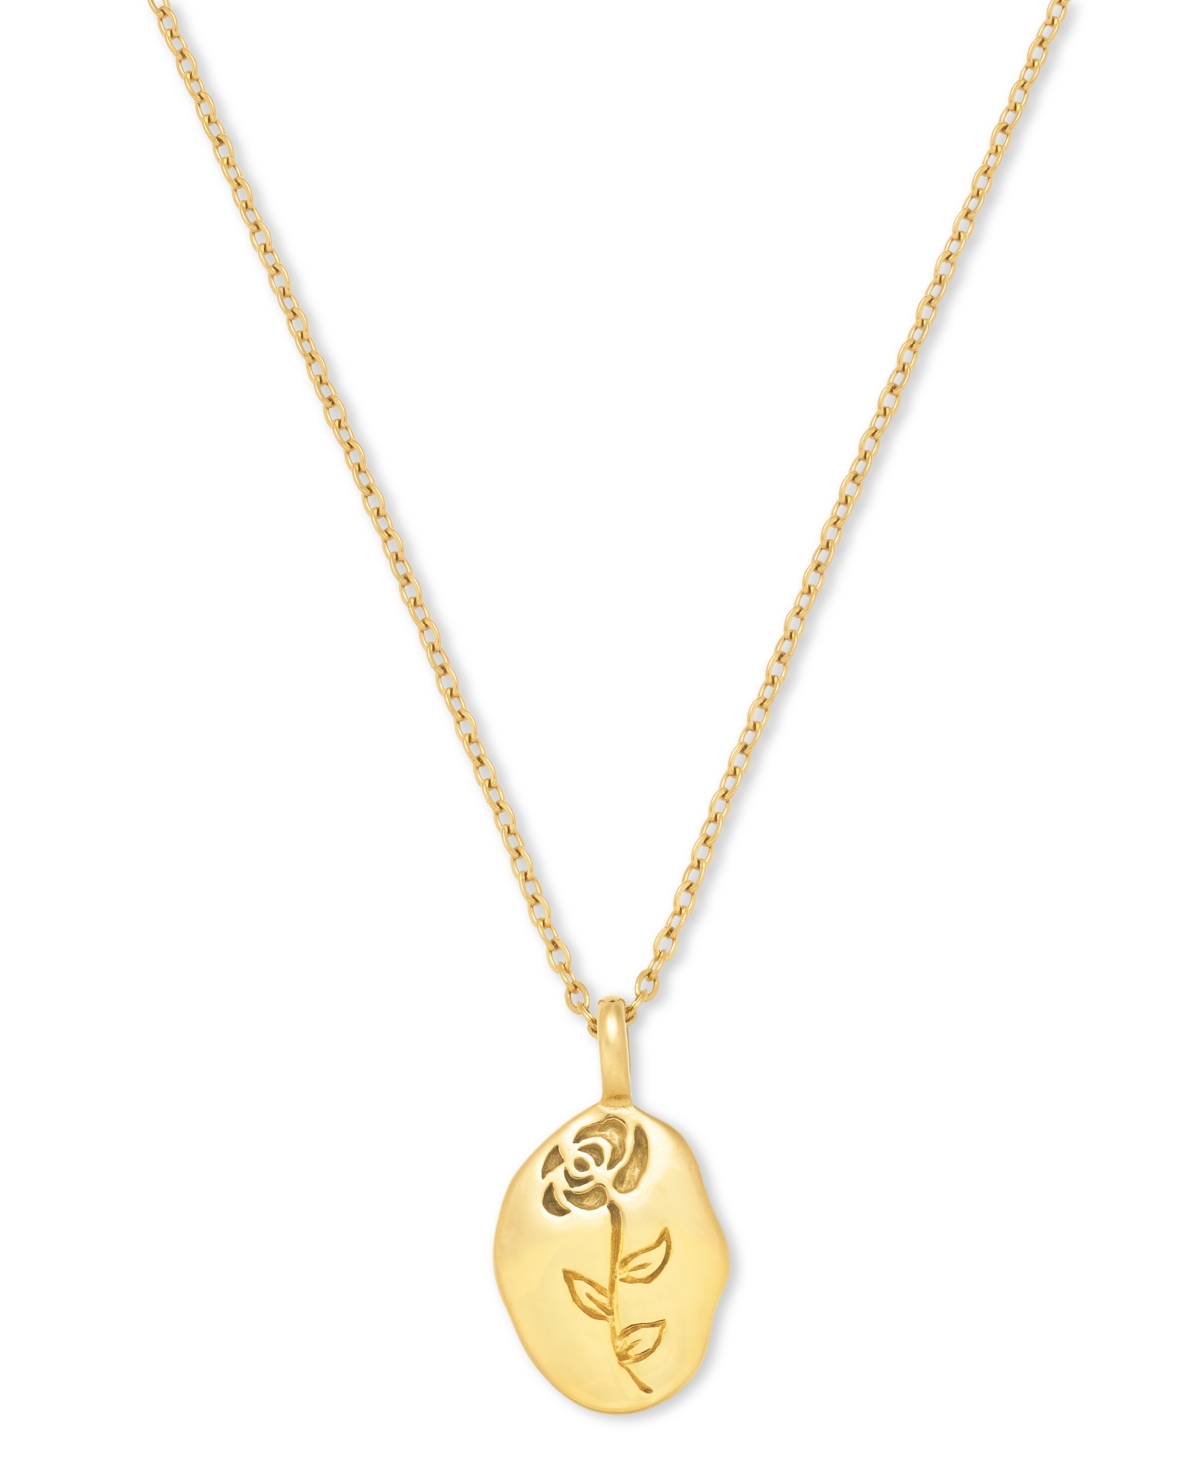 18k Gold-Plated Stainless Steel Flower-Etched Pendant Necklace, 20" + 2-1/2" extender - Gold